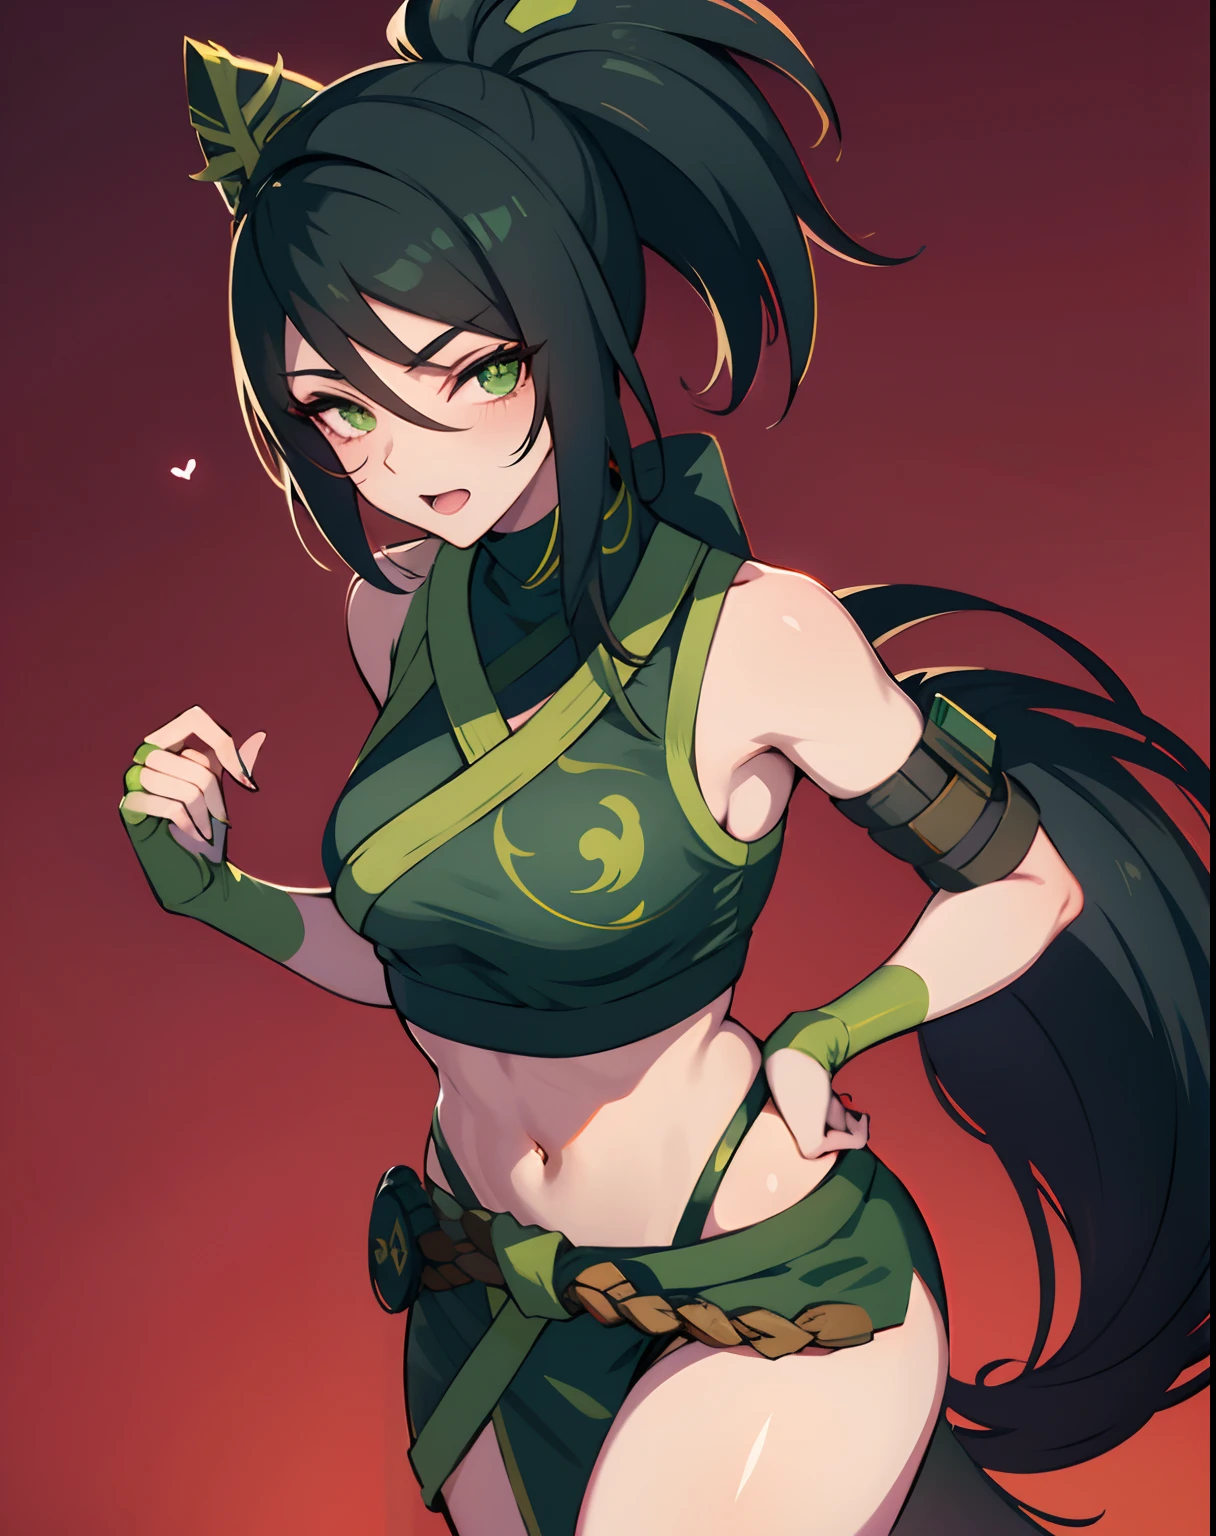 an exposed breast, 1 breast exposed, smallboobs, ninja clothes, akali, akali League of Legends, akali mask, , Bukkake, Tight Partiality, small breasts, breasts small, up skirt, shirt lift, ASİAN